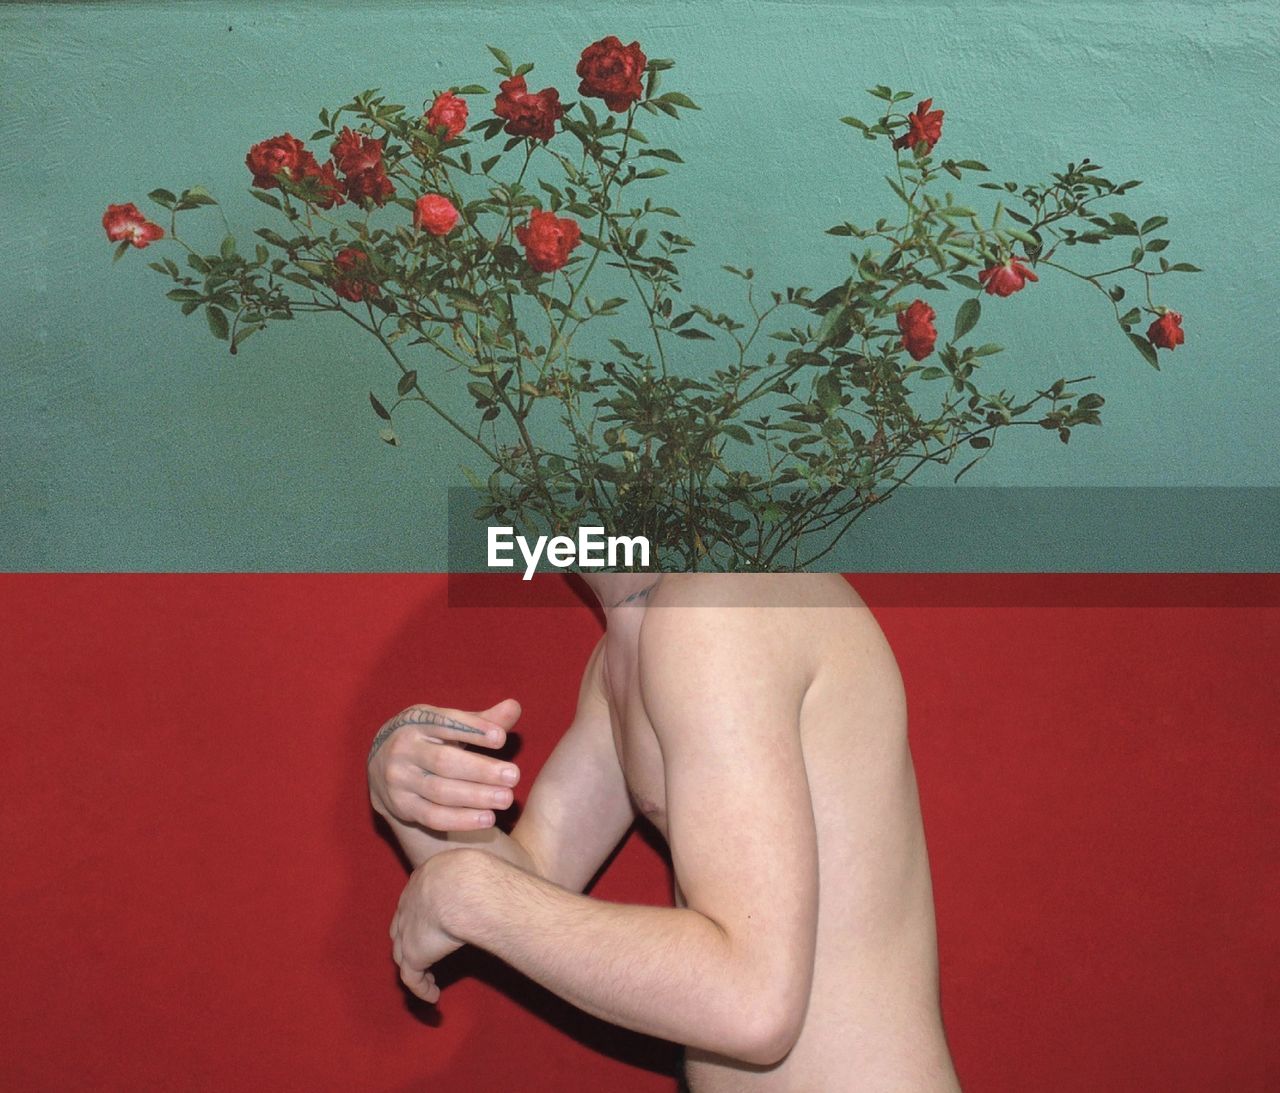 Image montage of shirtless man and flowering plants against wall